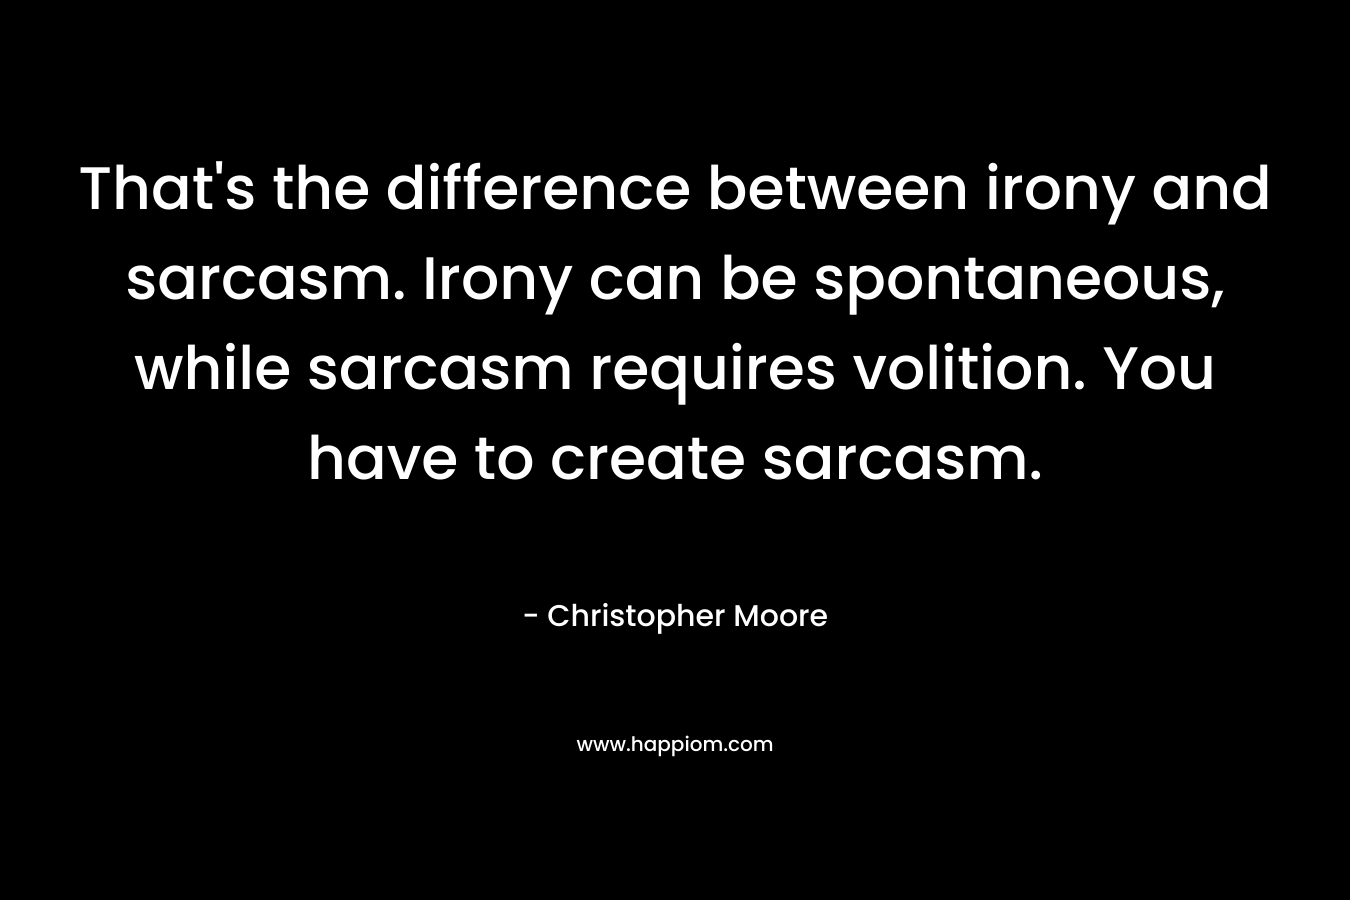 That's the difference between irony and sarcasm. Irony can be spontaneous, while sarcasm requires volition. You have to create sarcasm.